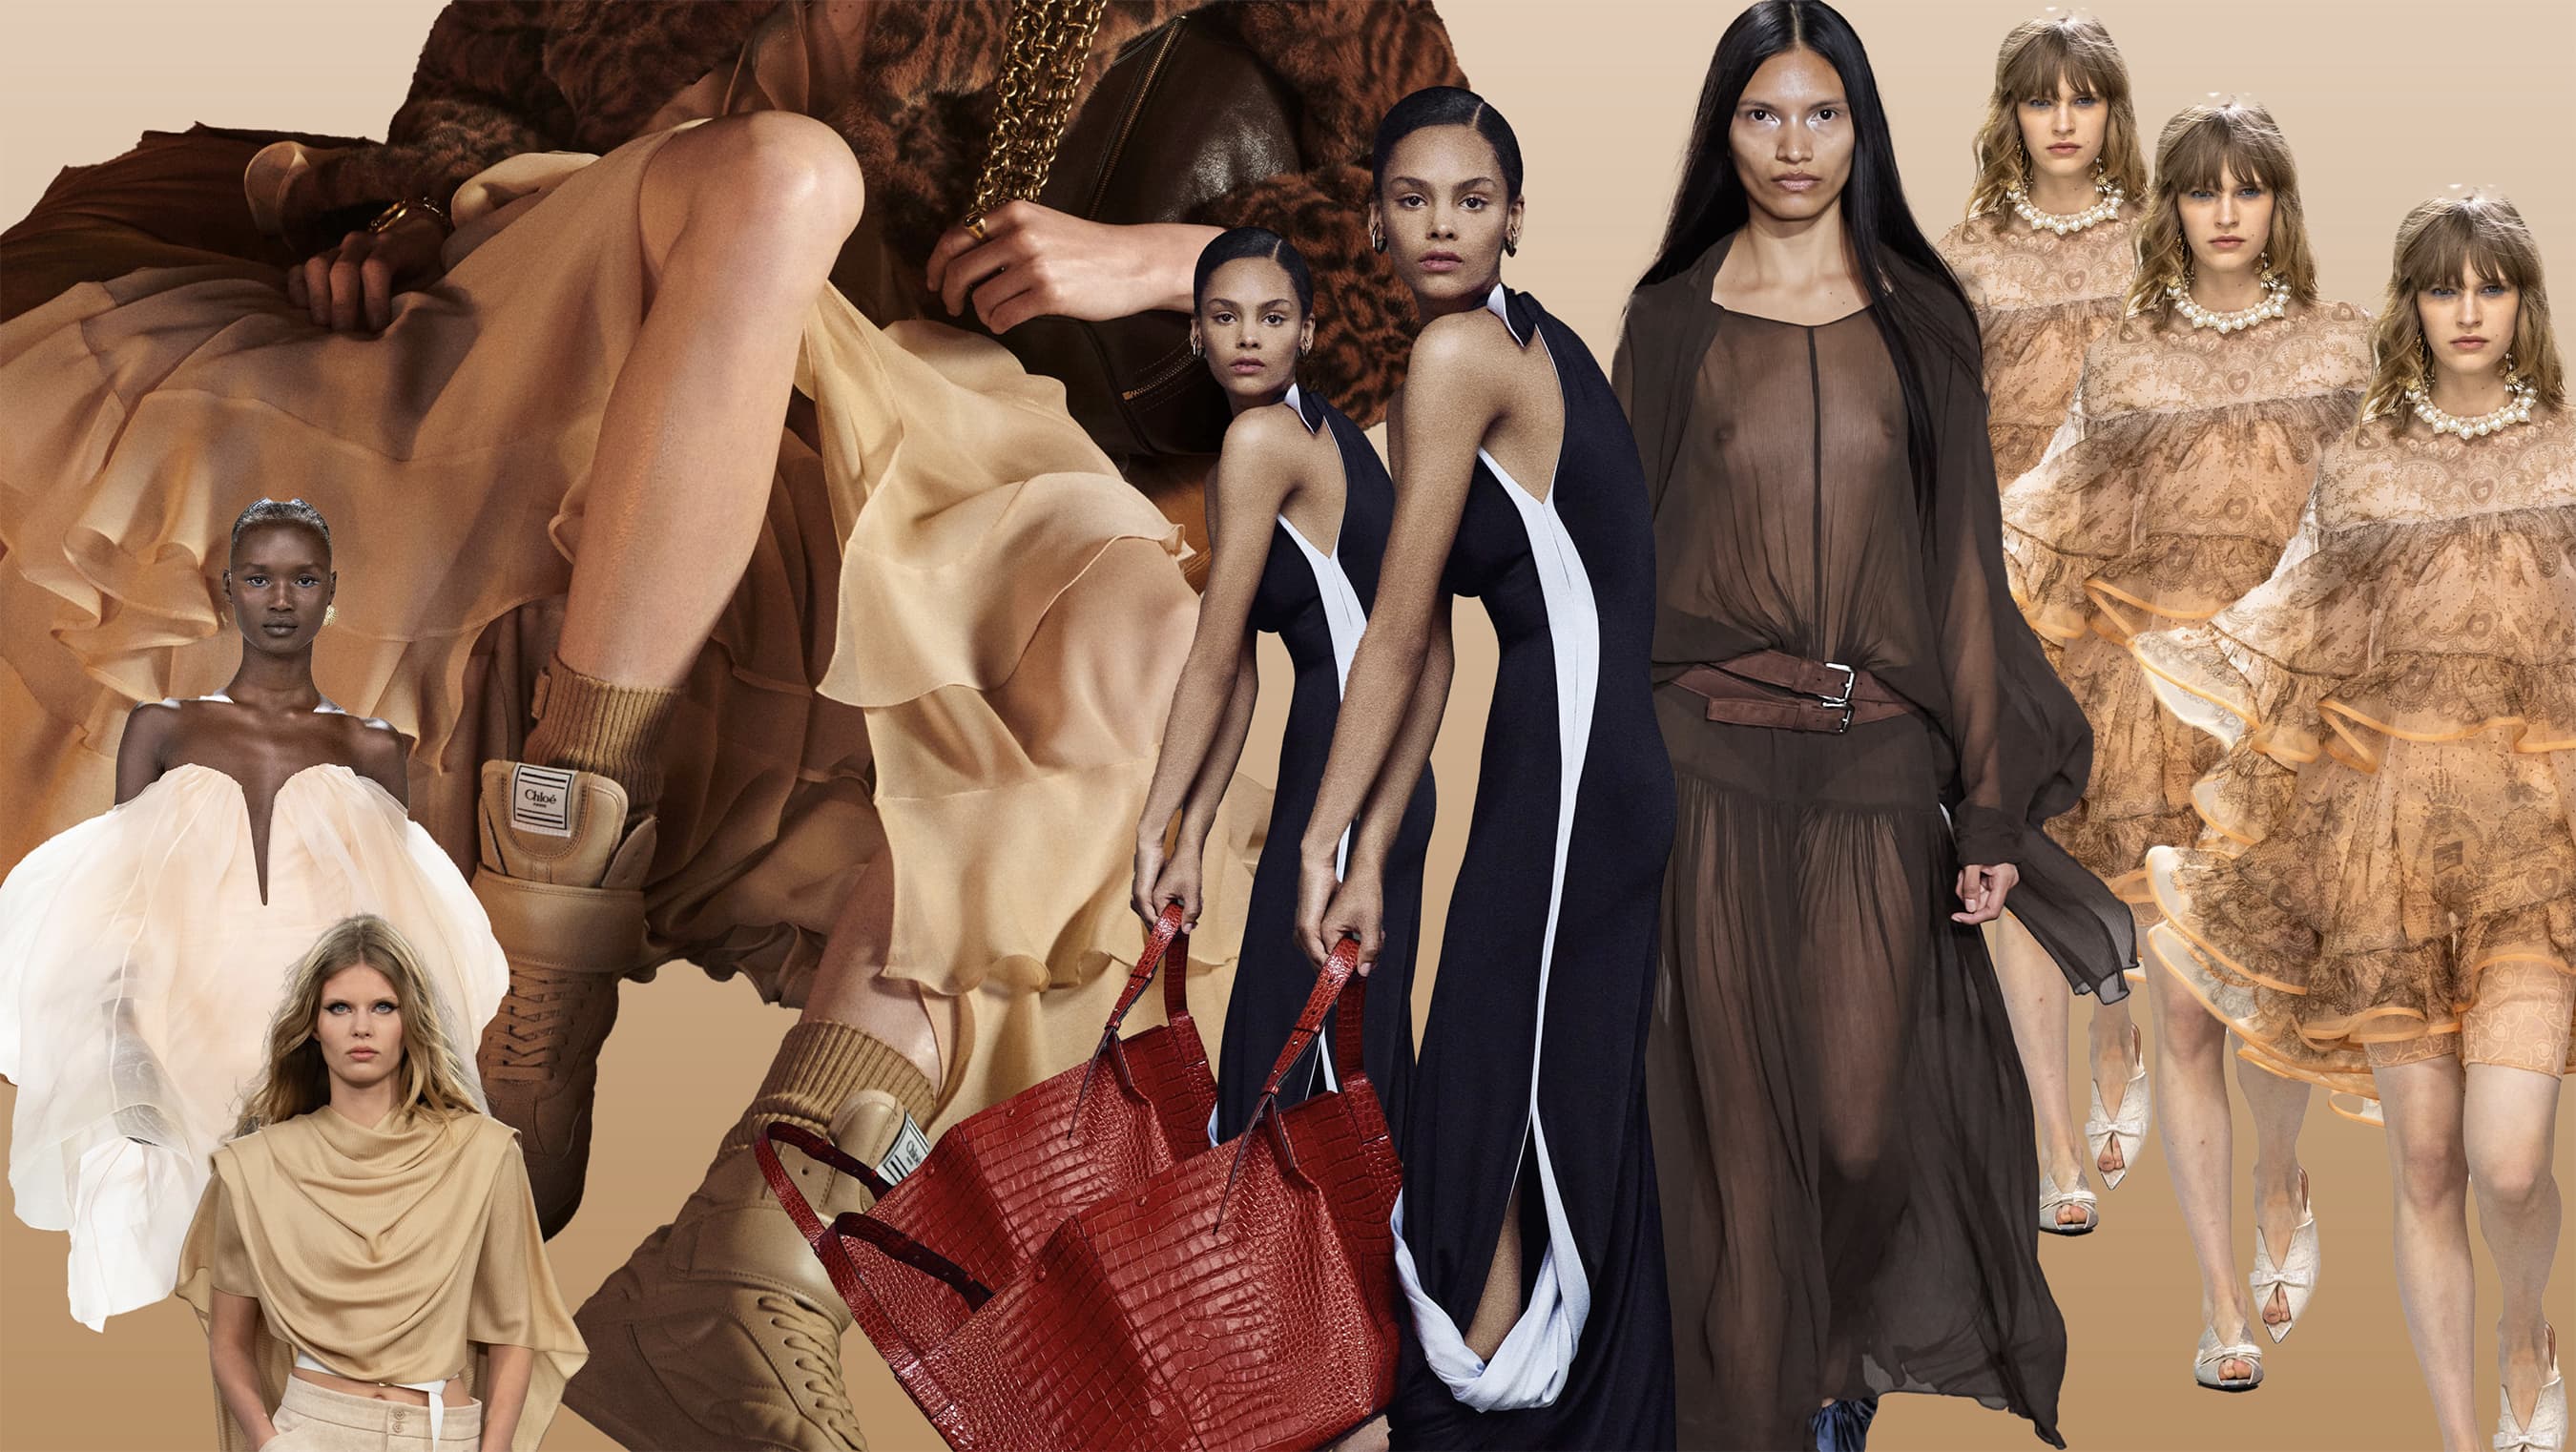 Daring Drapery resort 2025 womenswear trend header image with fashion photos from chloe, louis vuitton & more